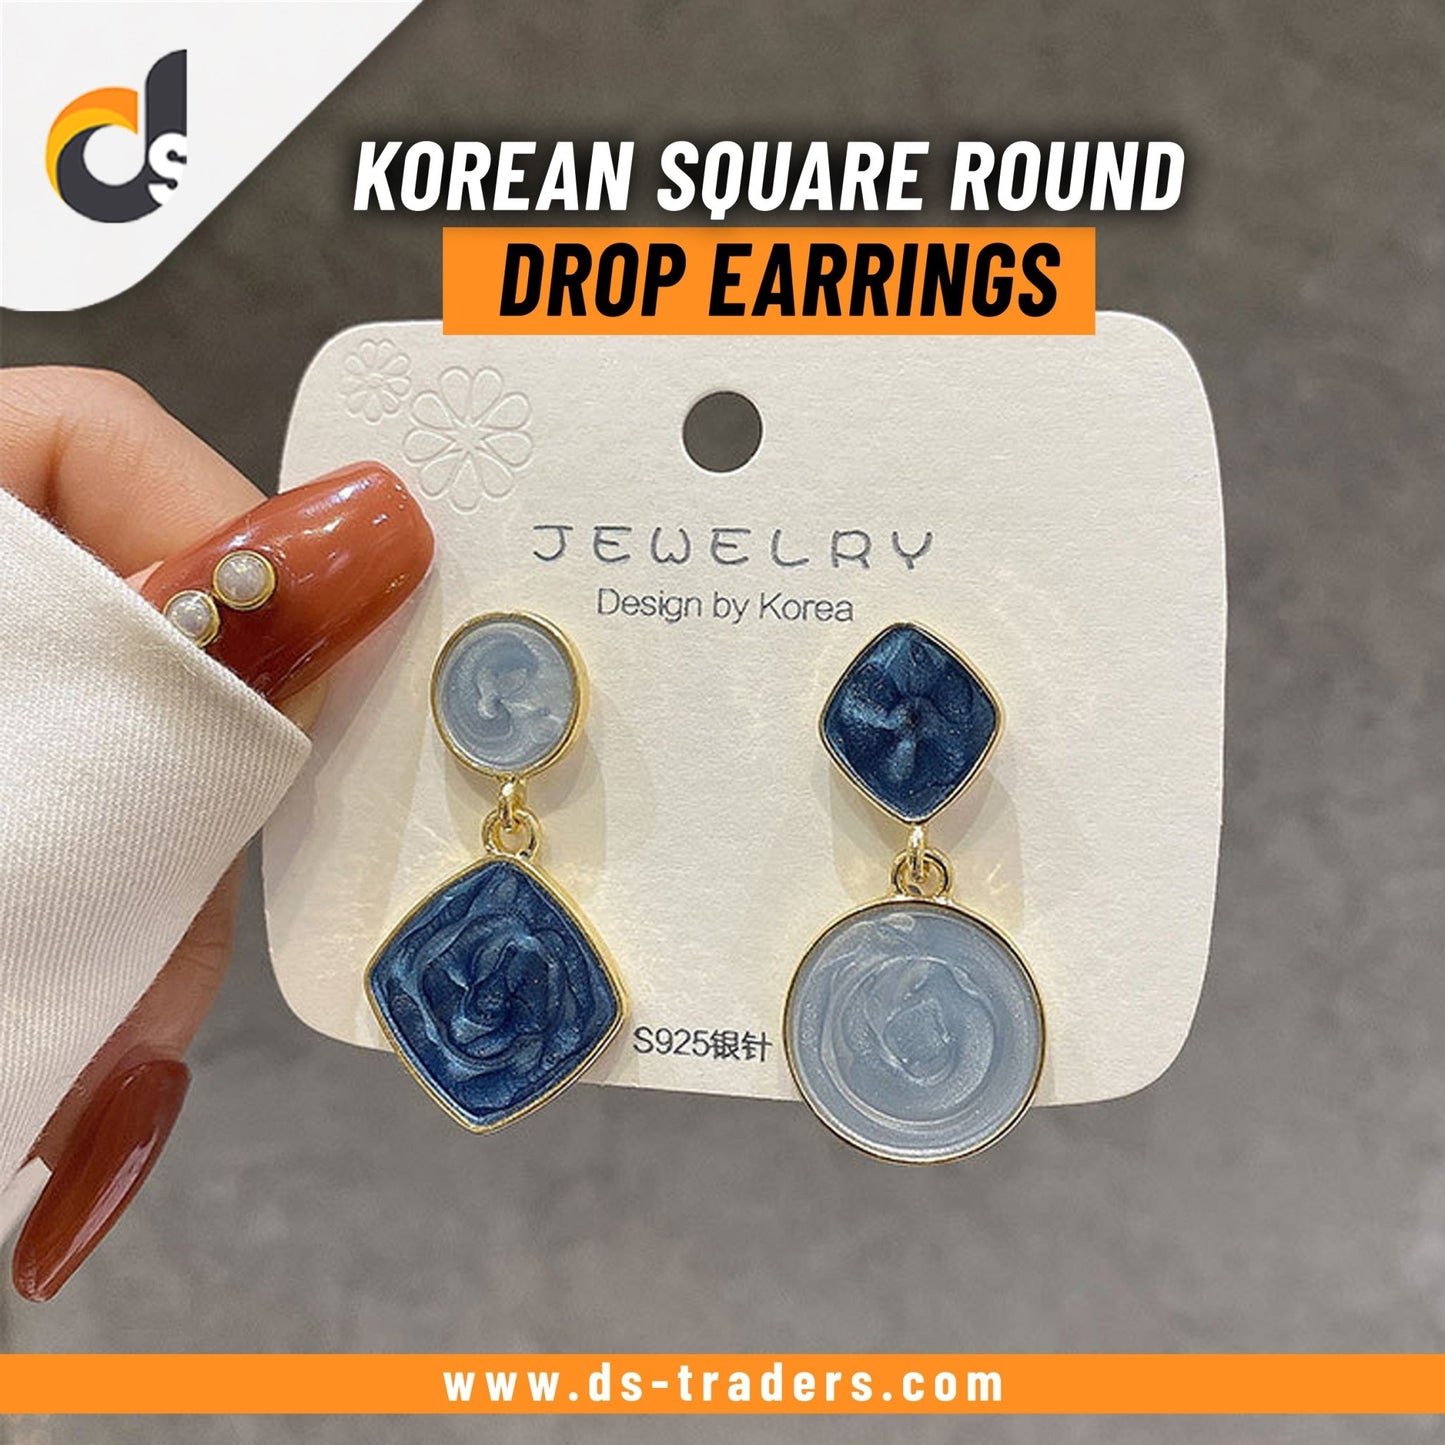 Korean Square Round Drop Earrings - Blue Color - DS Traders